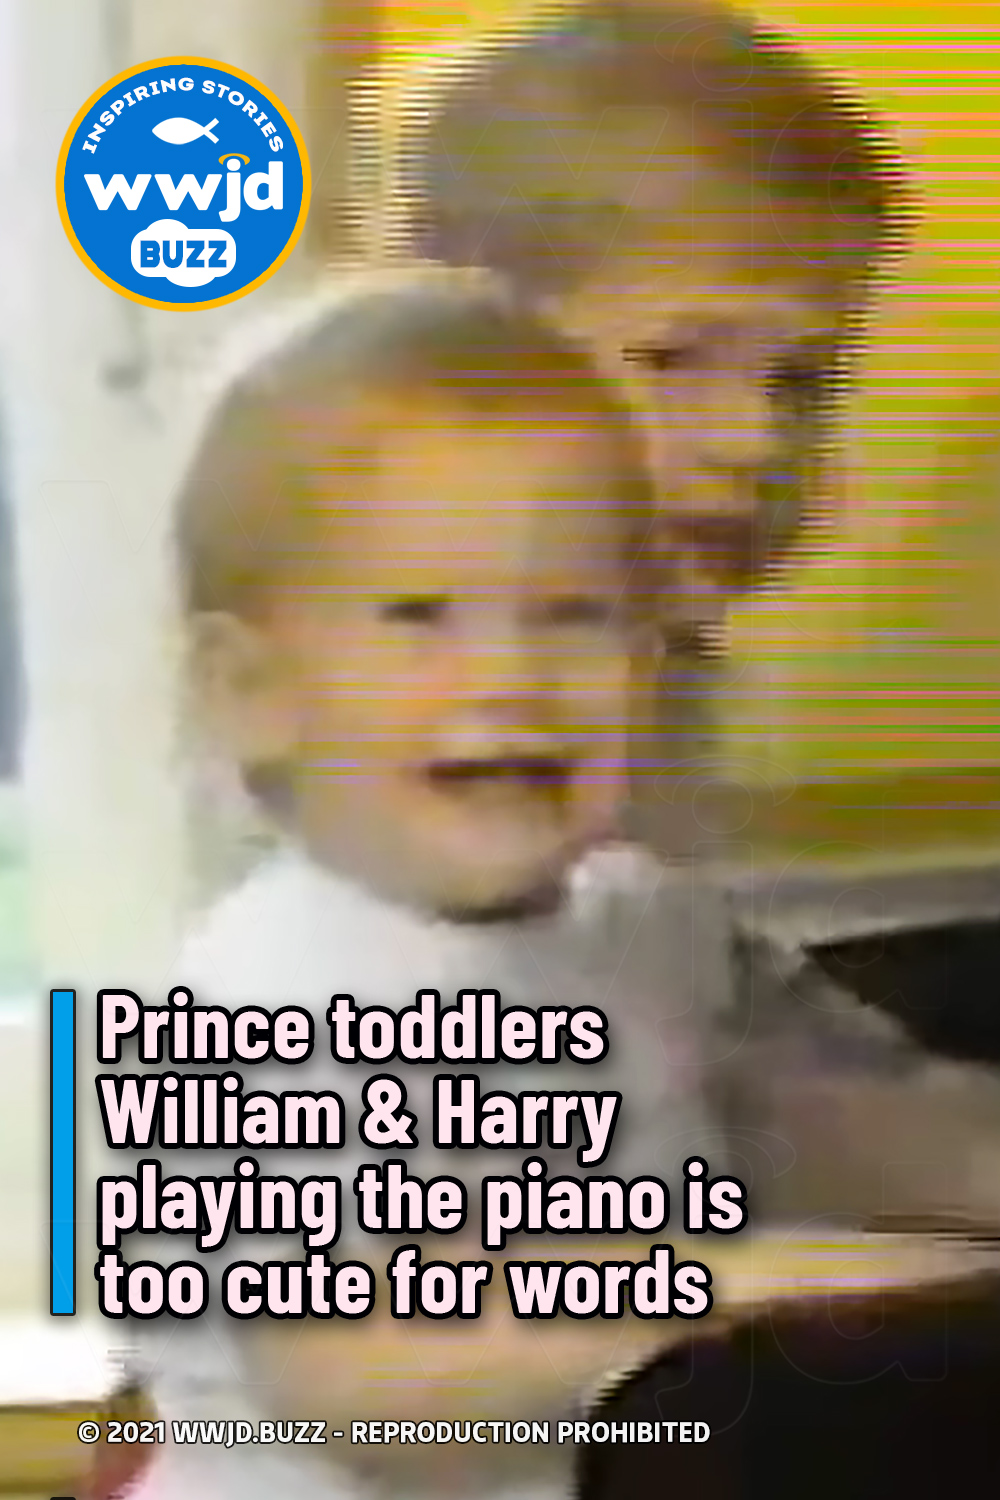 Prince toddlers William & Harry playing the piano is too cute for words